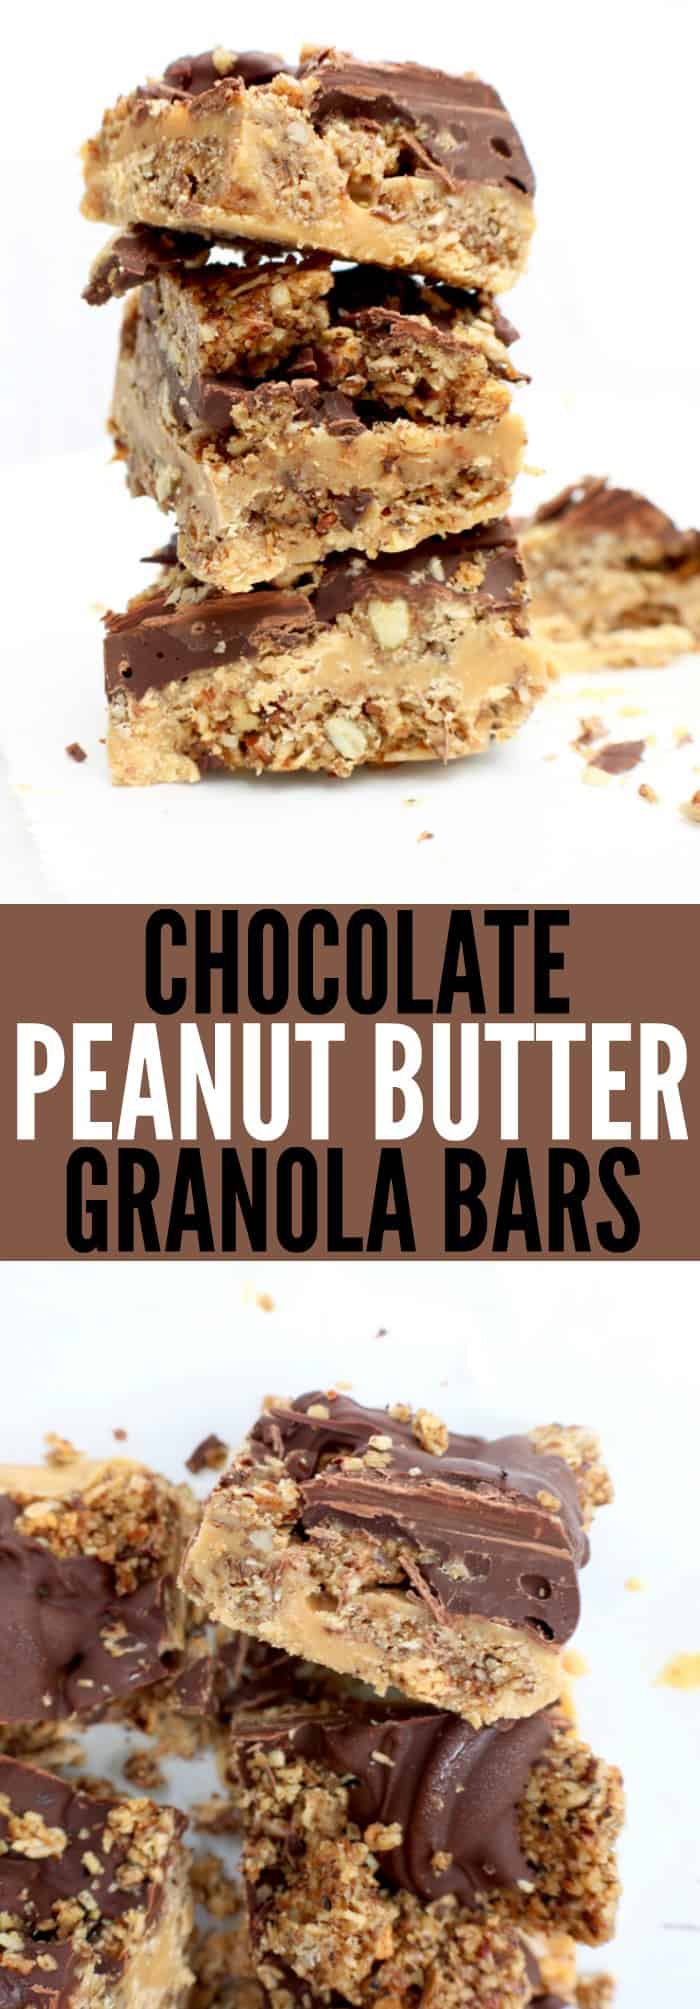 Chocolate Peanut Butter Granola Bars - The Toasted Pine Nut